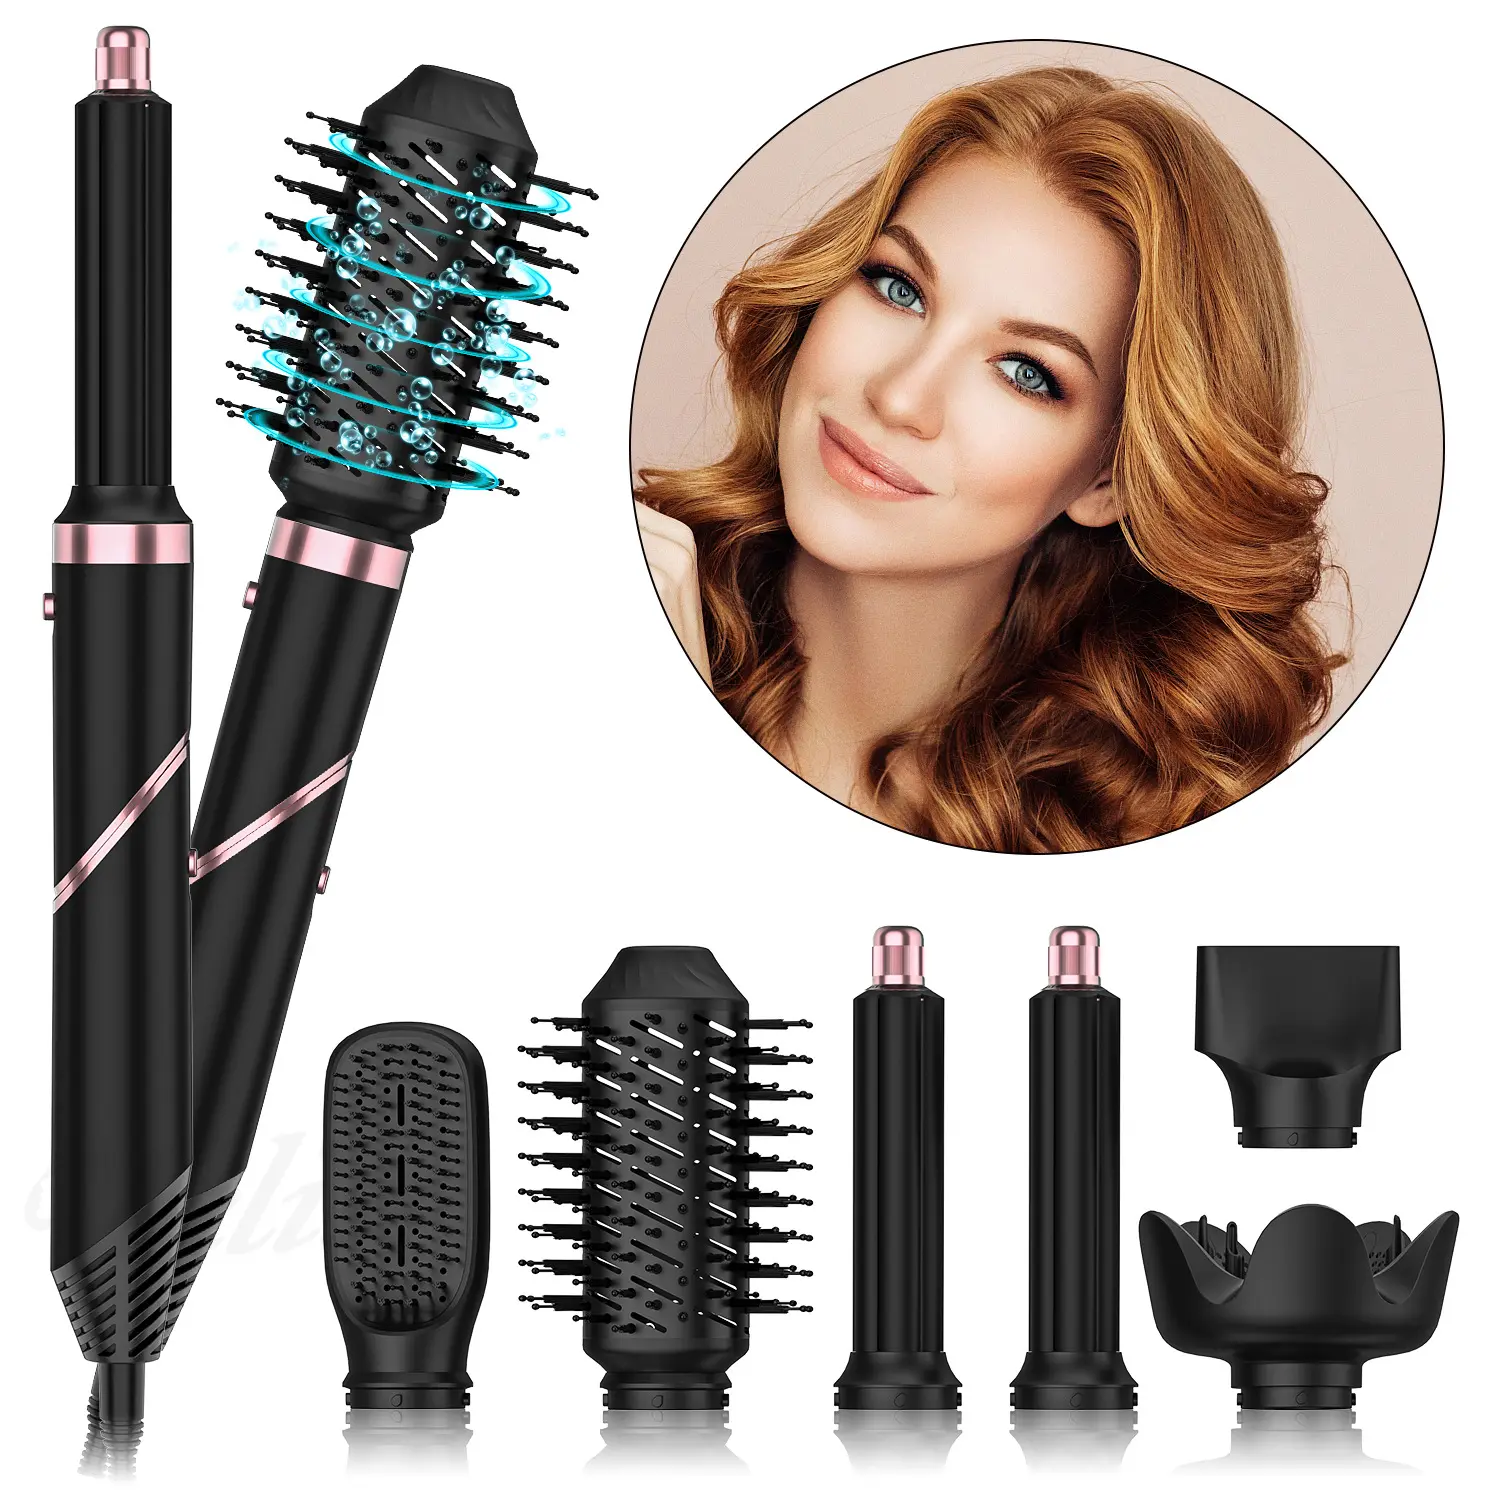 6 in 1 Multi-functional Head High Speed Hair Dryer Hot Air Comb Automatic Straight Curling Iron